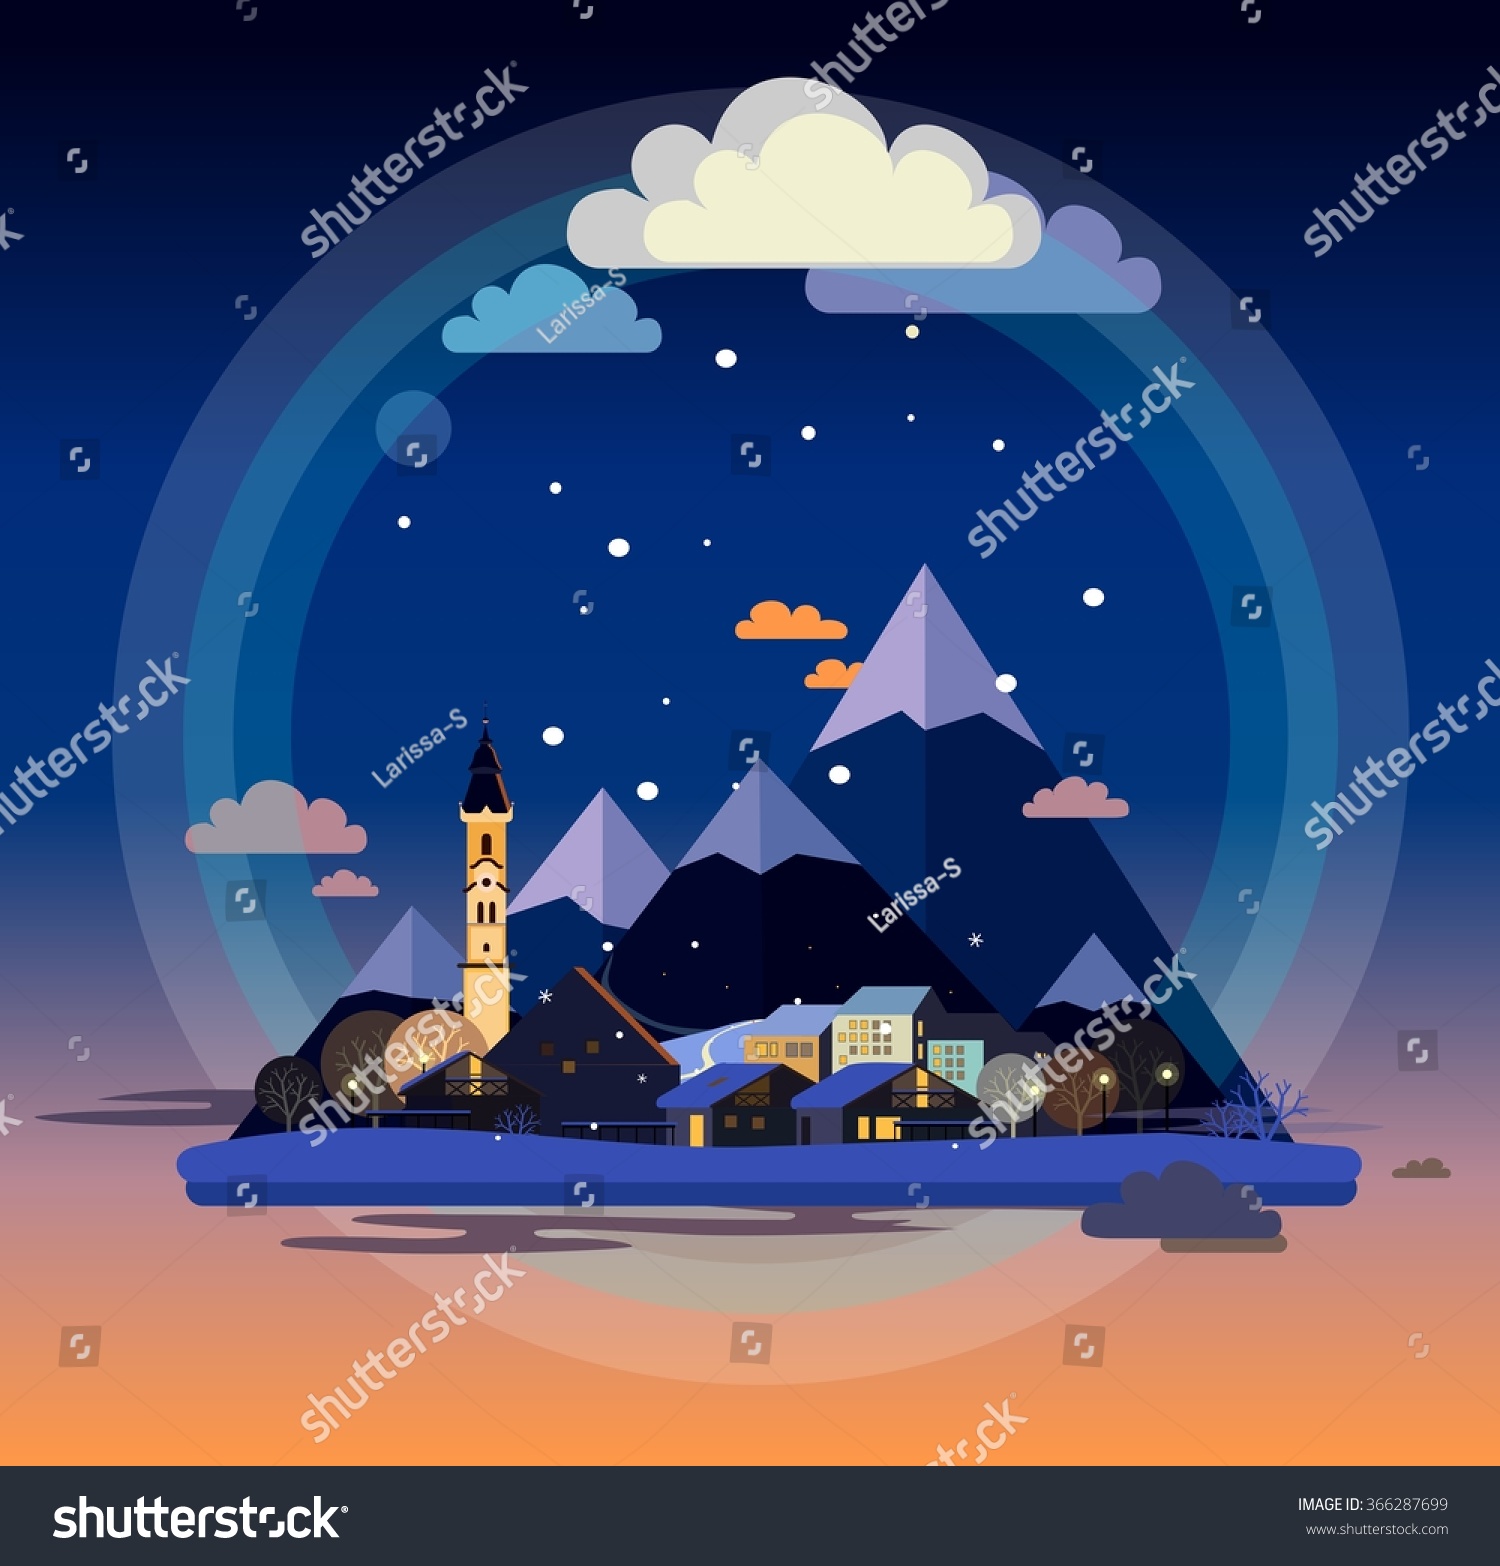 Alpine landscape illustration Small european austrian town with Church chalets winter trees